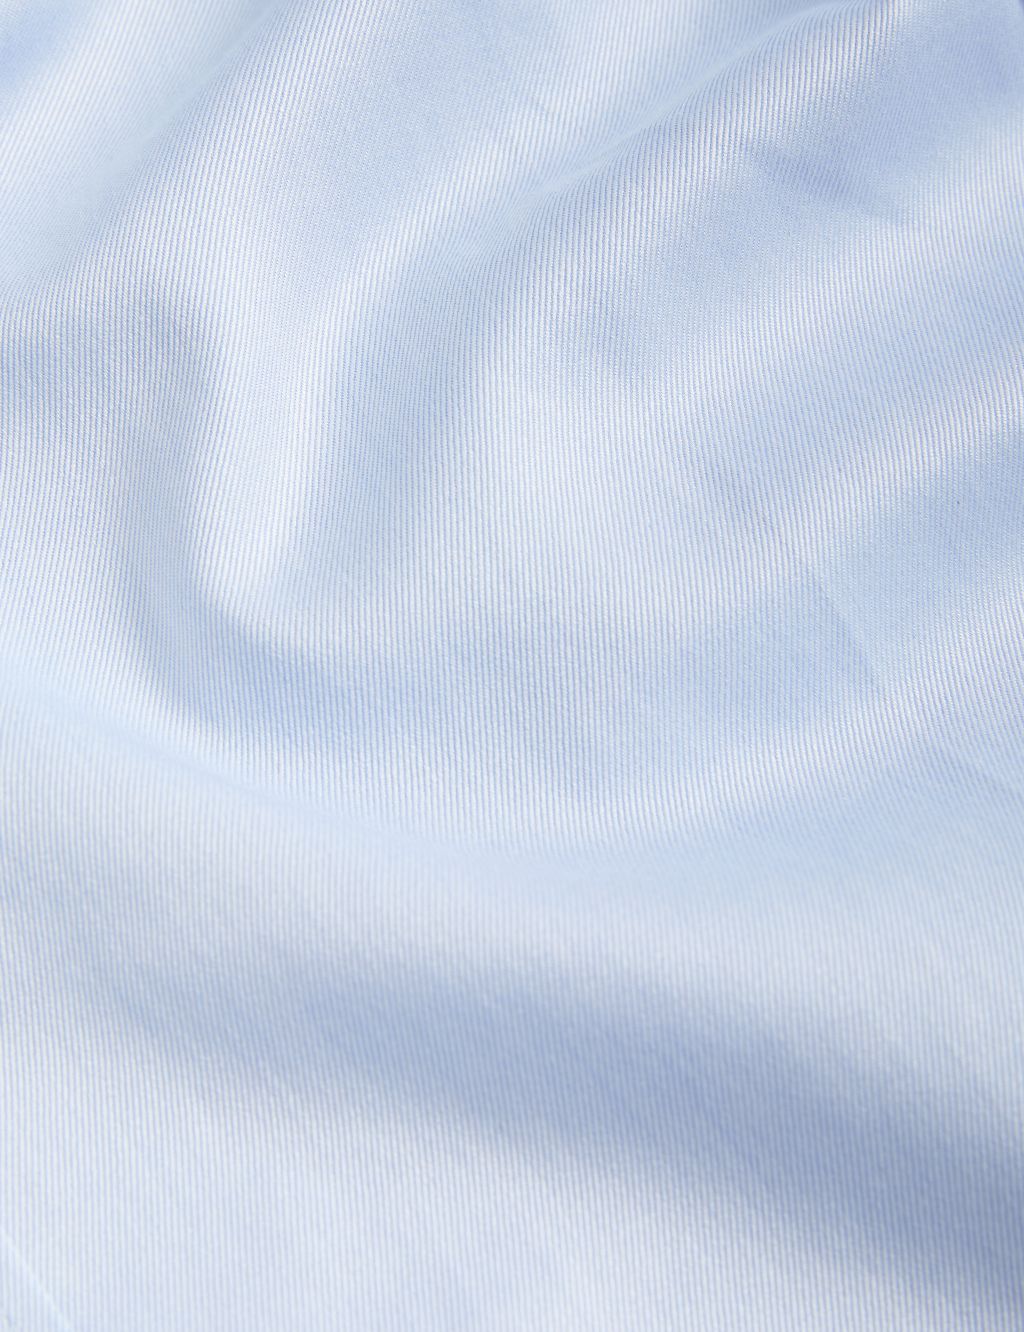 Tailored Fit Pure Cotton Twill Shirt image 3